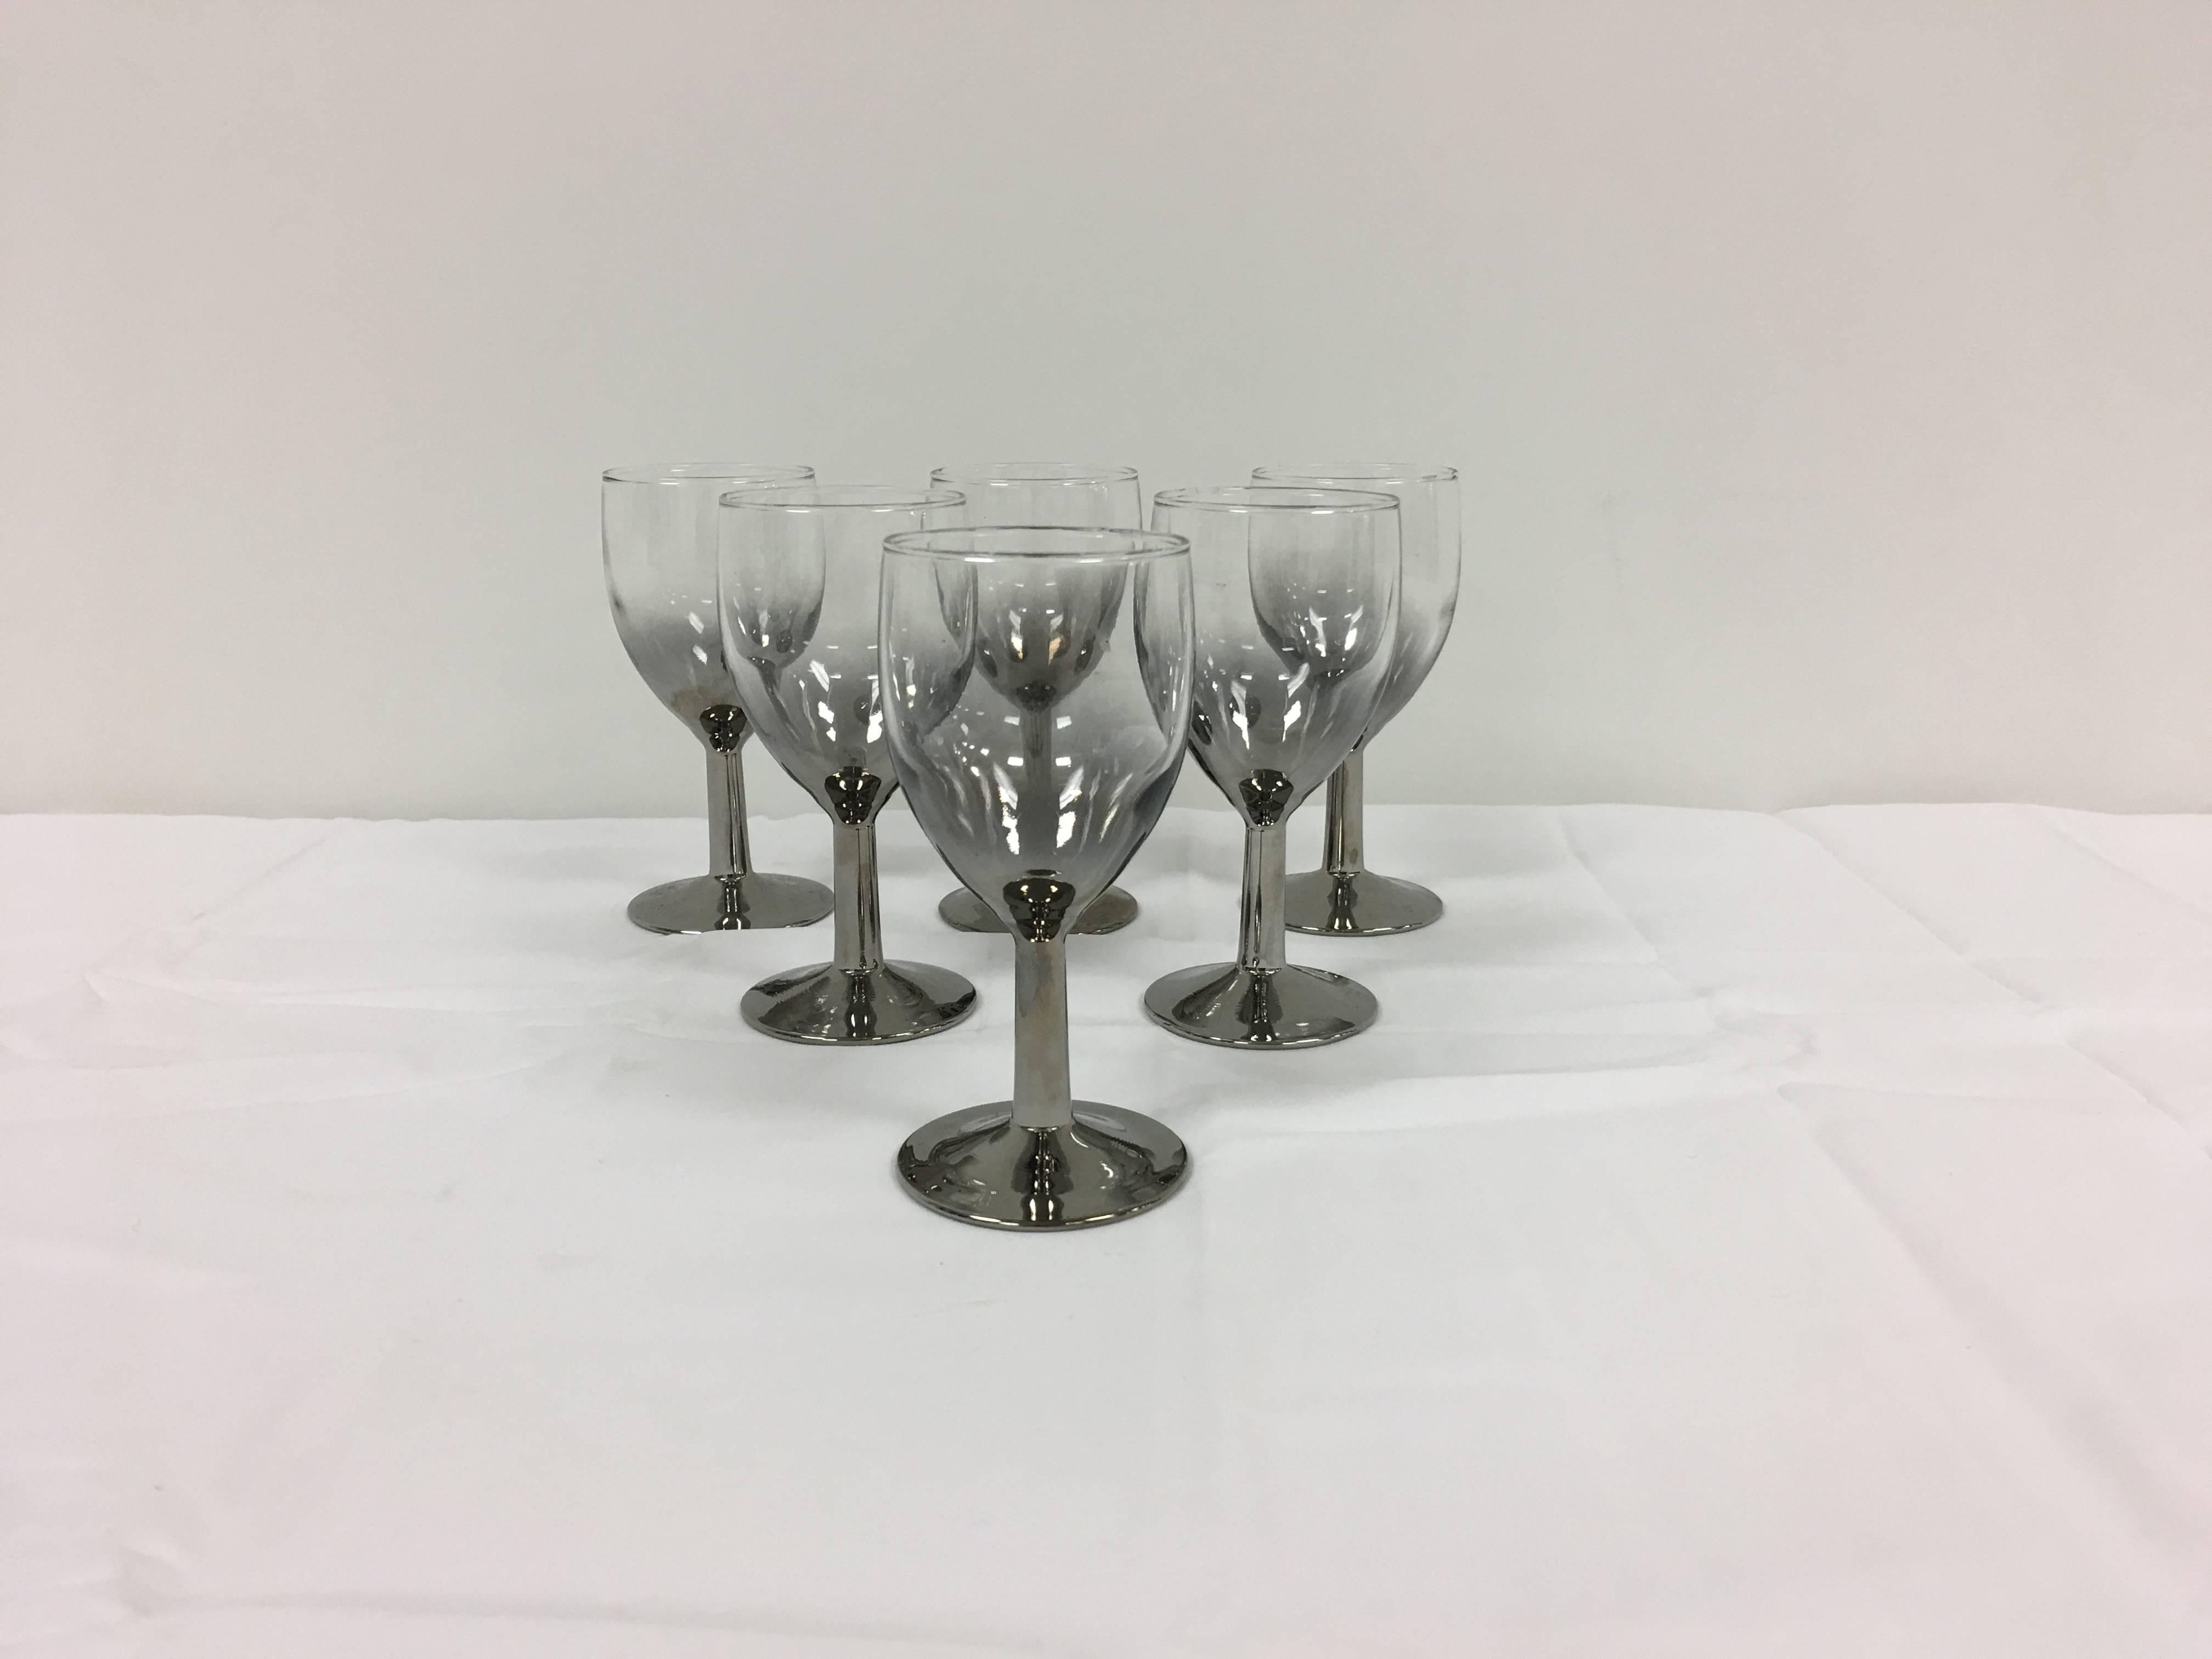 Offered is a gorgeous set of six, Dorothy Thorpe platinum cocktail glasses. Includes chrome stand. 

Each glass is 2.5